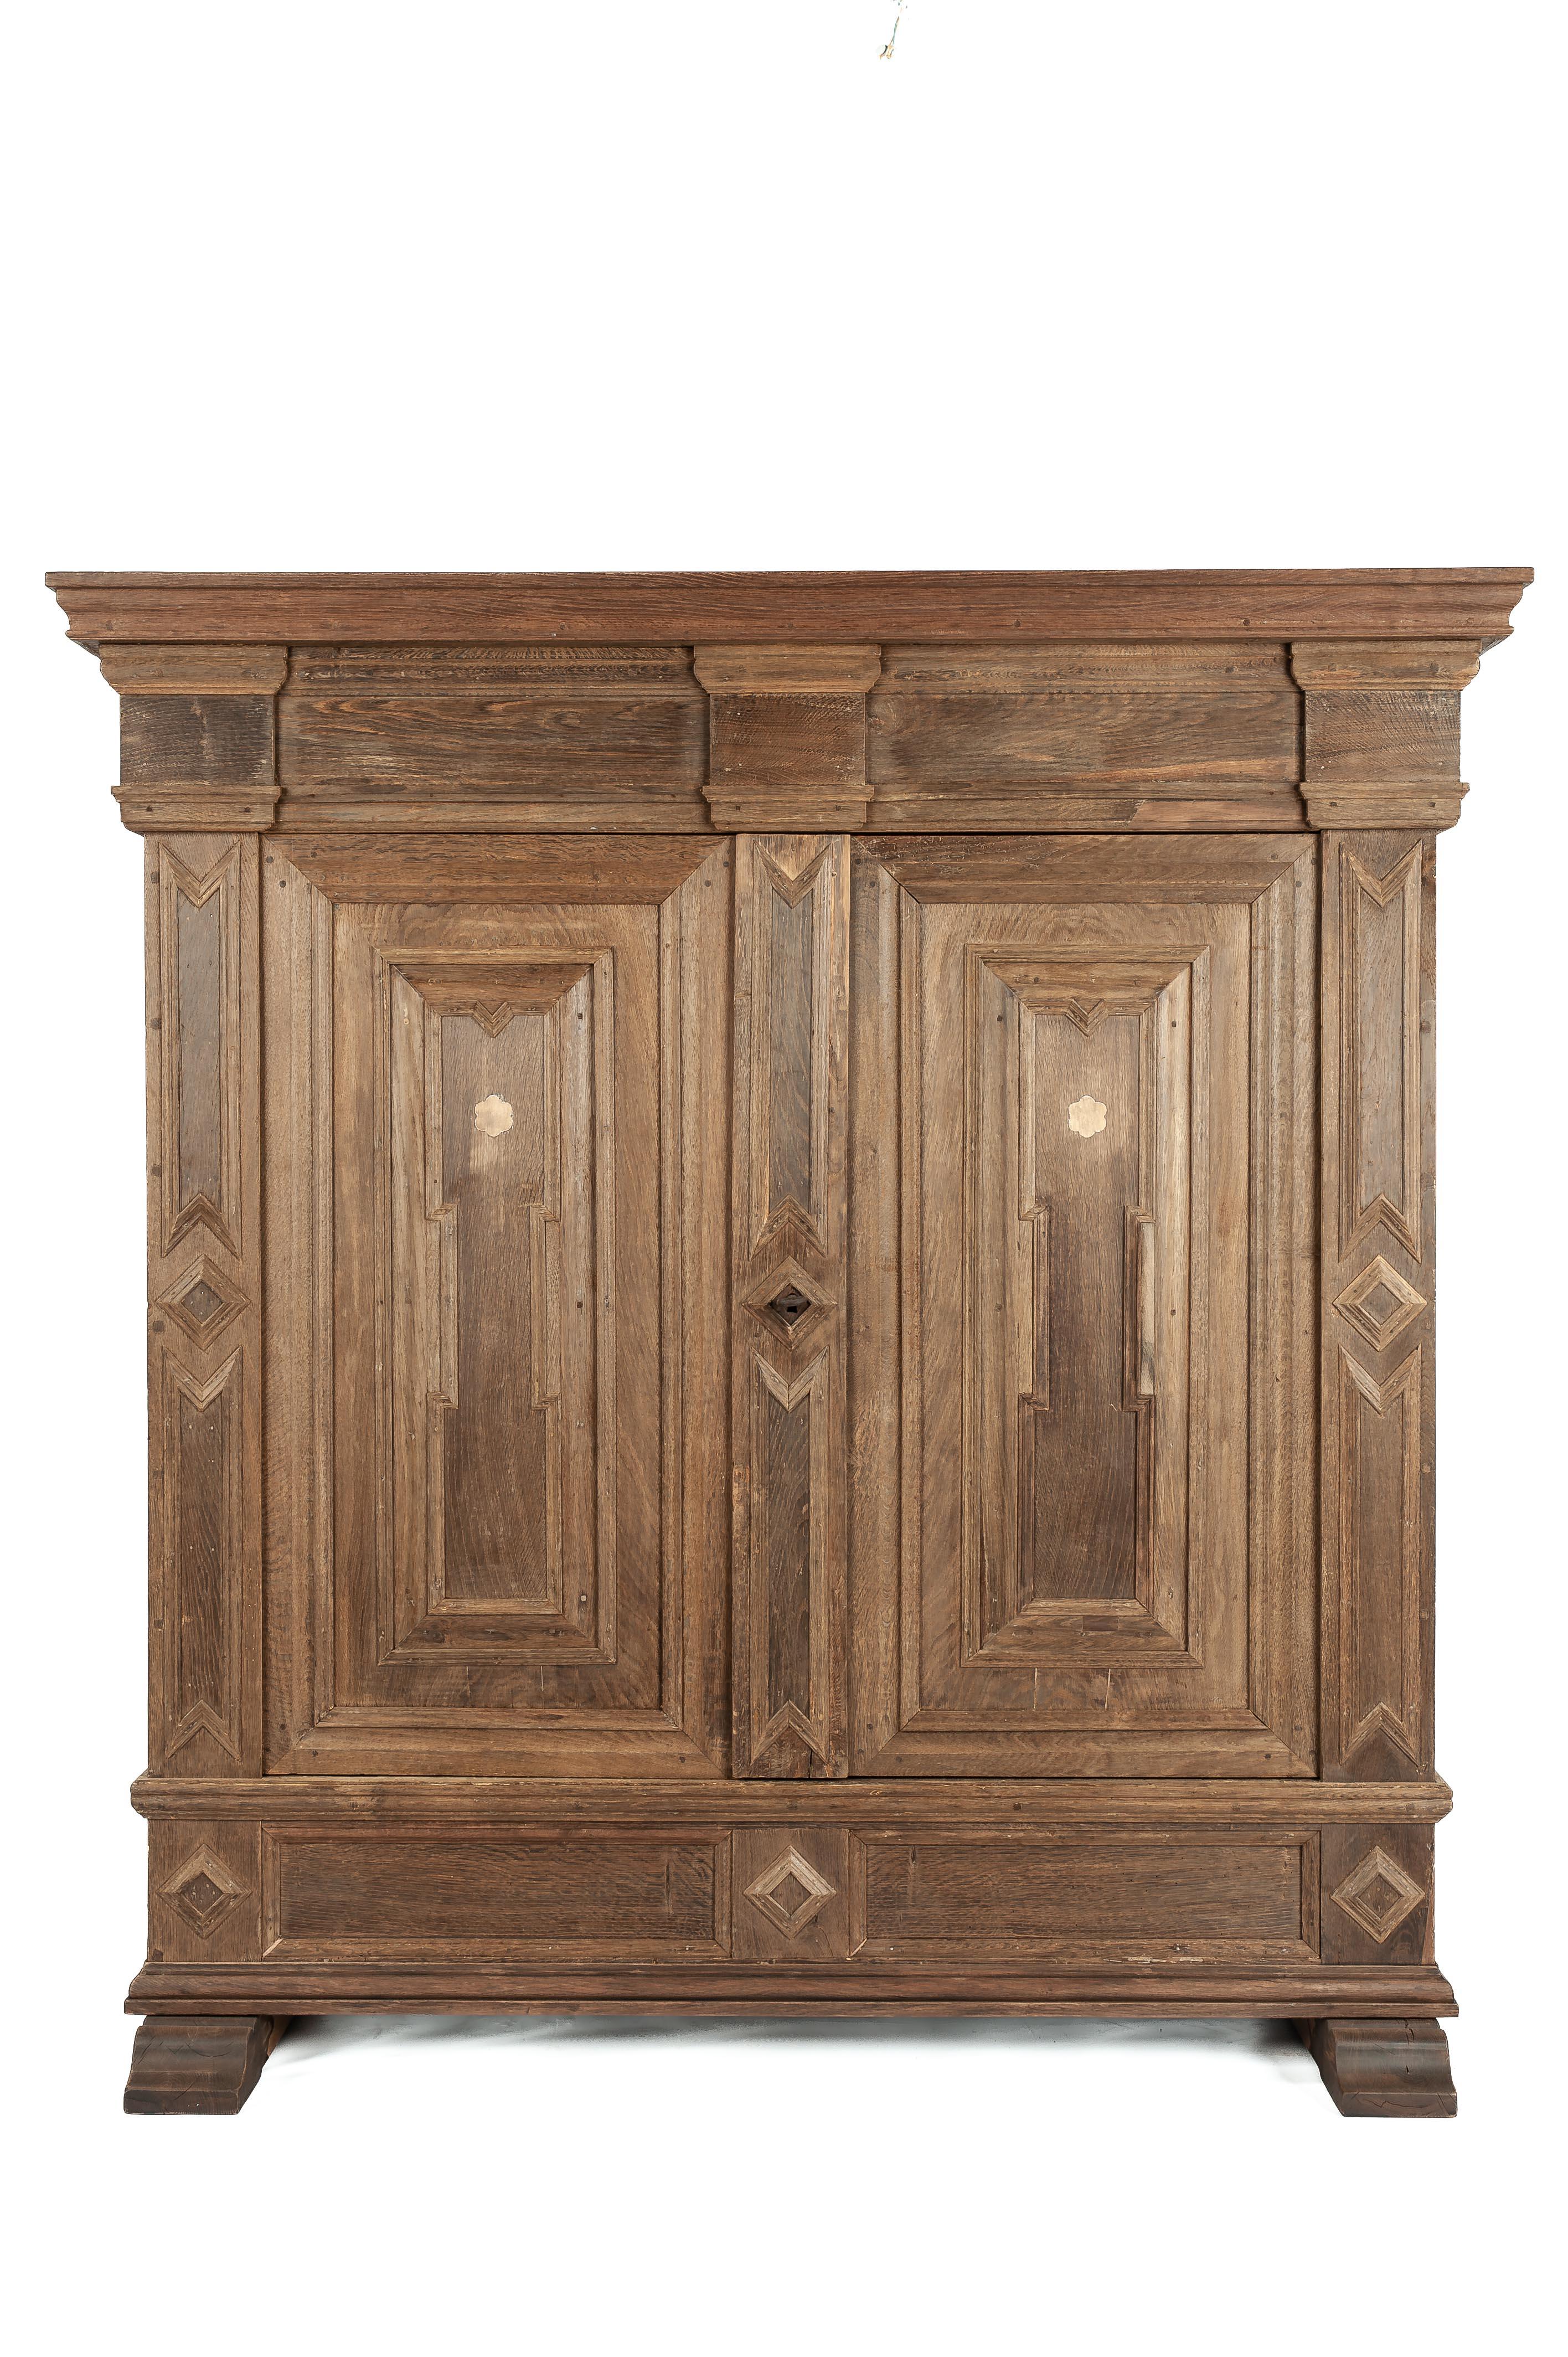 This antique oak cabinet was crafted in the early 20th century in the German state of North Rhine-Westphalia around 1720. The cabinet was entirely built from the finest quality European summer oak. It features two doors and is richly adorned with